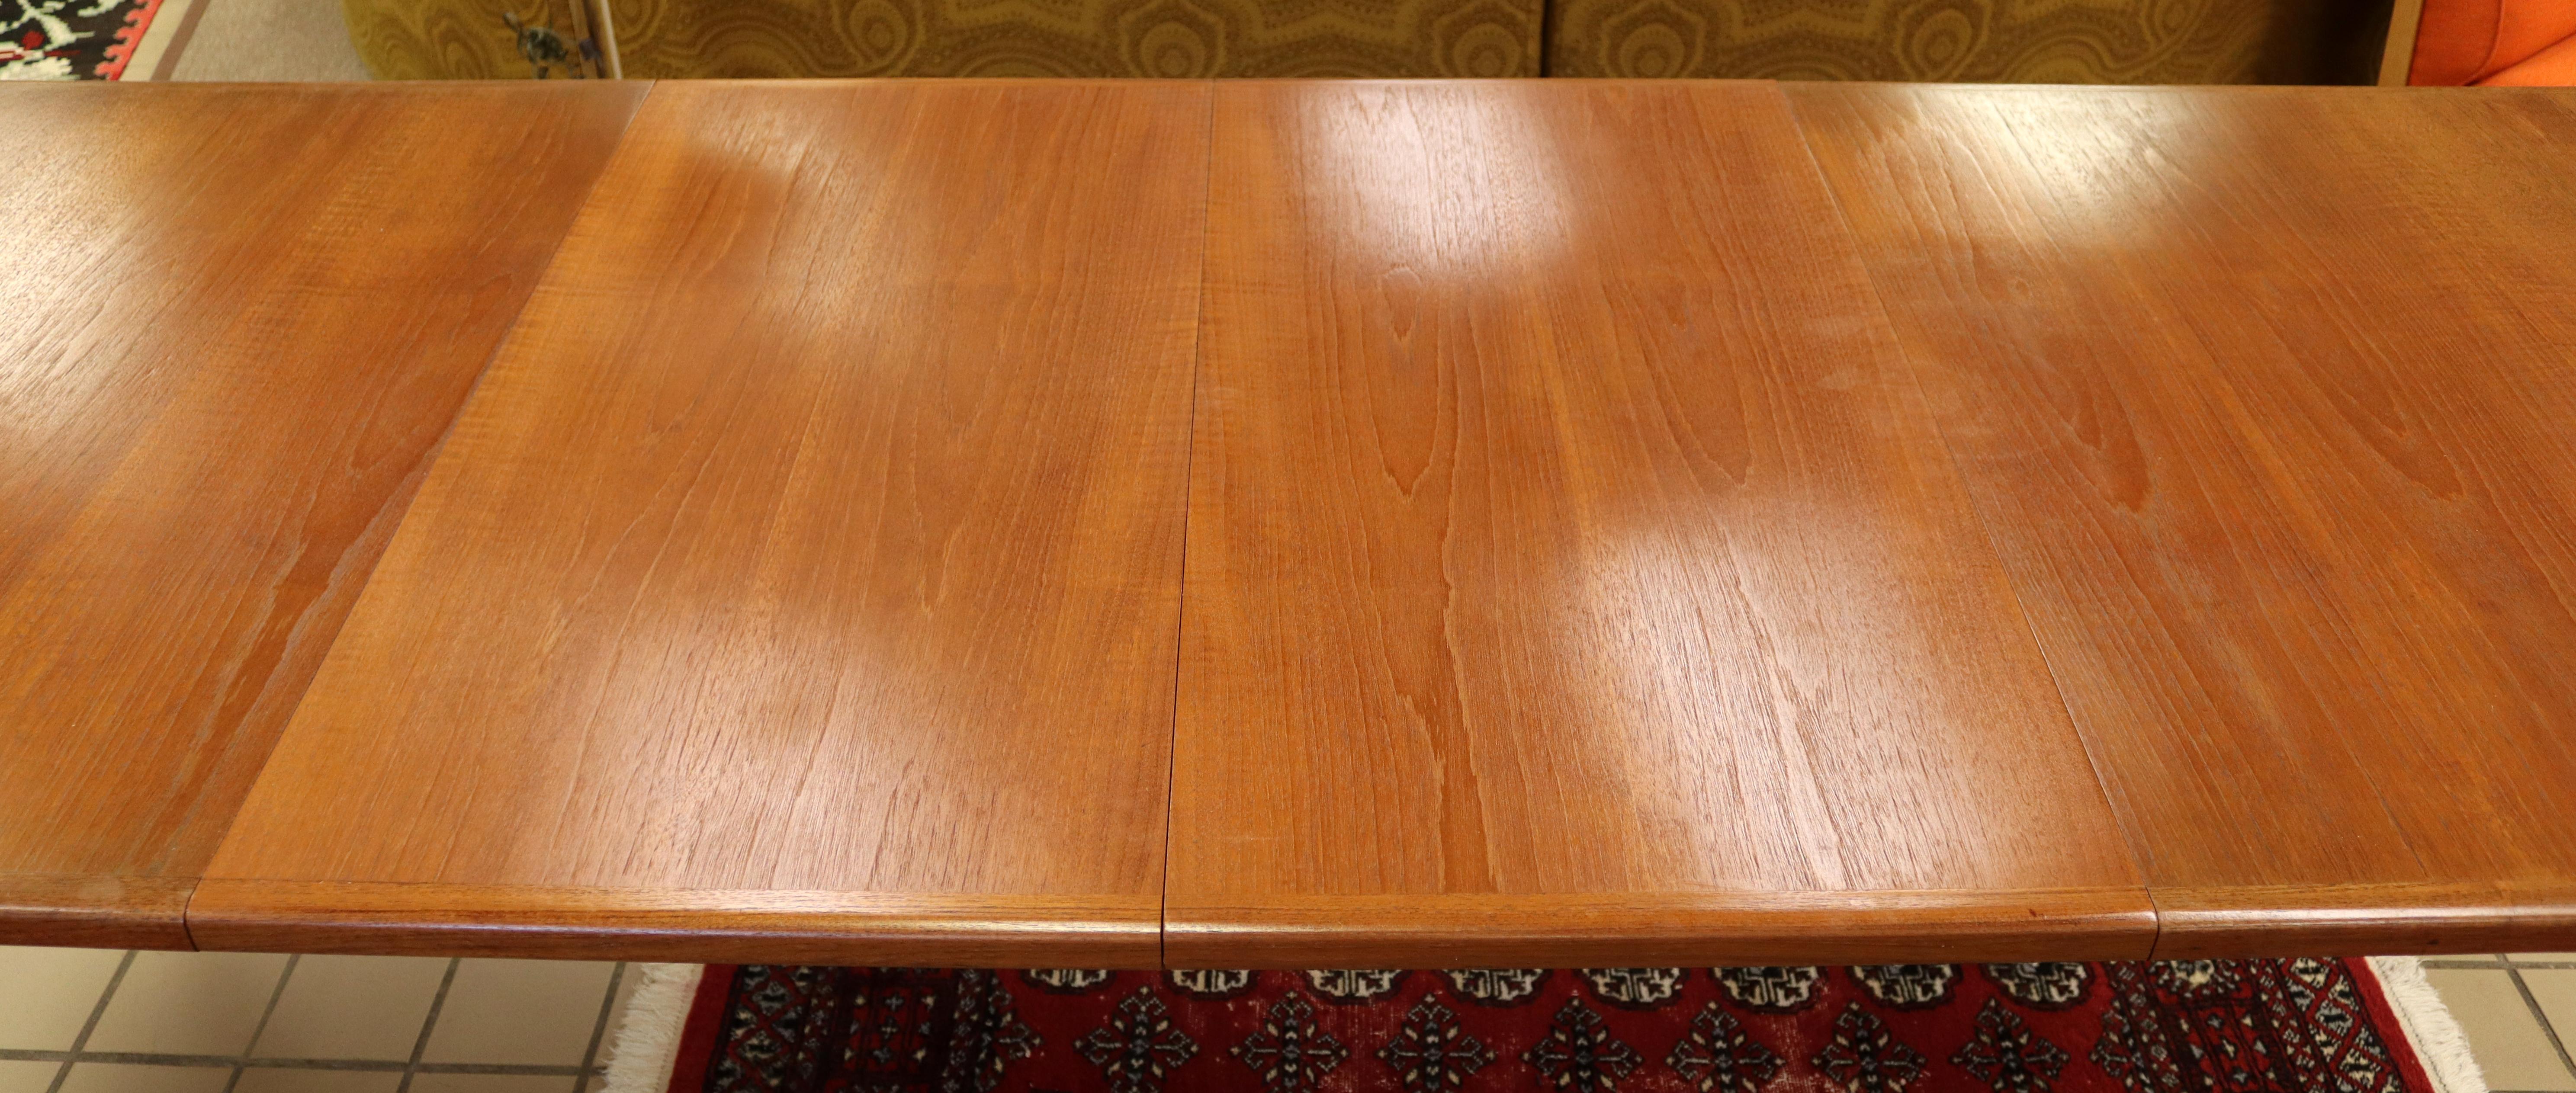 Mid-20th Century Mid-Century Modern Knoll Bill Stephens Expandable Wood Dining Table 2 Leaves